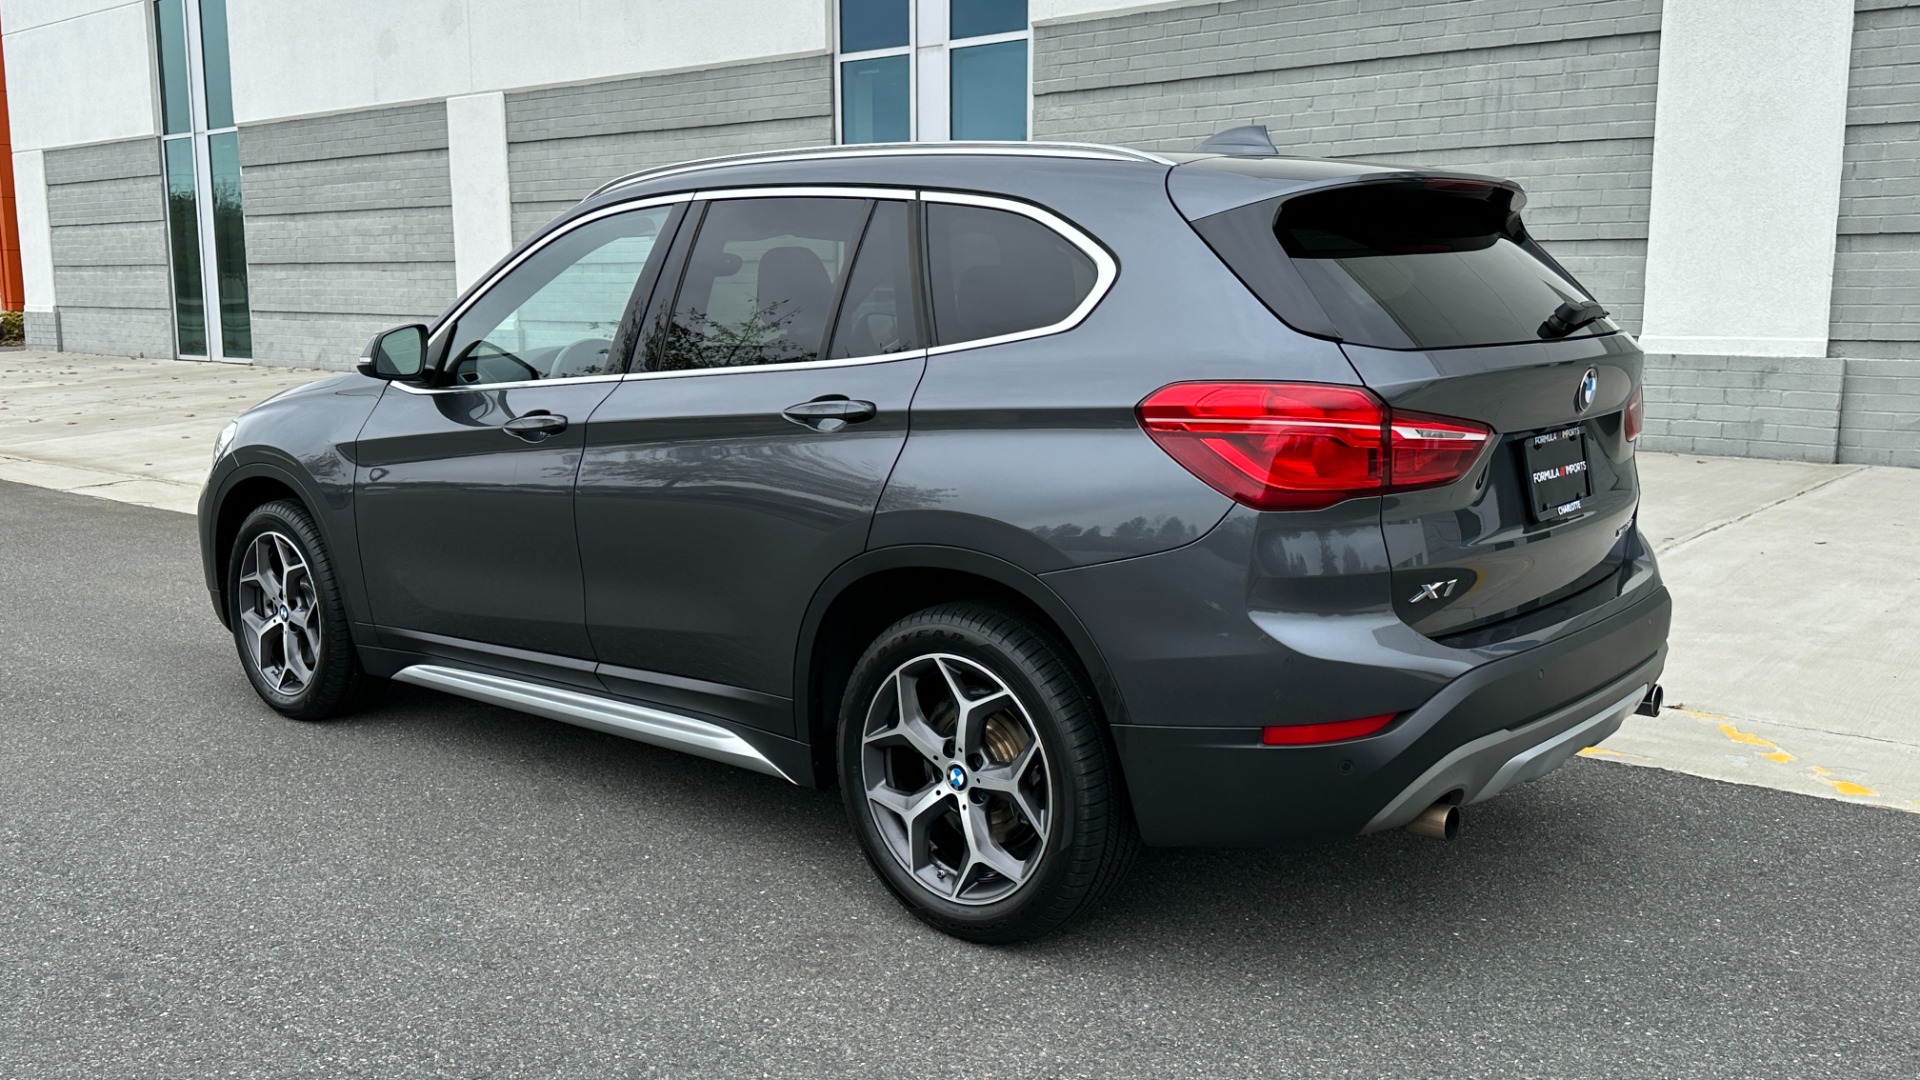 Used 2019 BMW X1 xDrive28i / PANORAMIC ROOF / HEATED SEATS / REVIEW CAMERA / LANE DEPARTURE for sale $31,995 at Formula Imports in Charlotte NC 28227 4